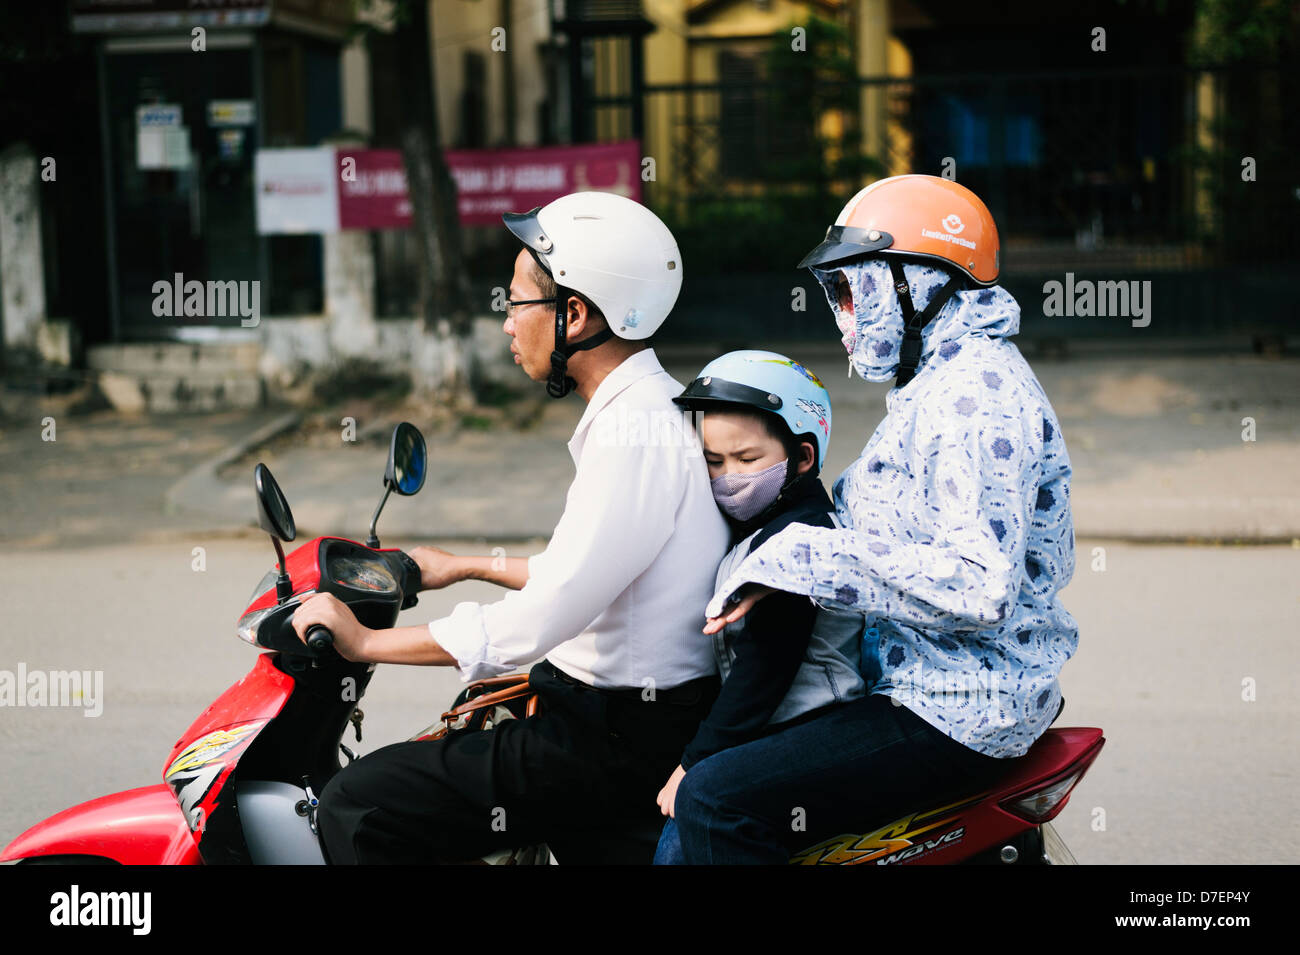 Hanoi, Vietnam - 2 adults and a small child riding a motor scooter with face masks Stock Photo